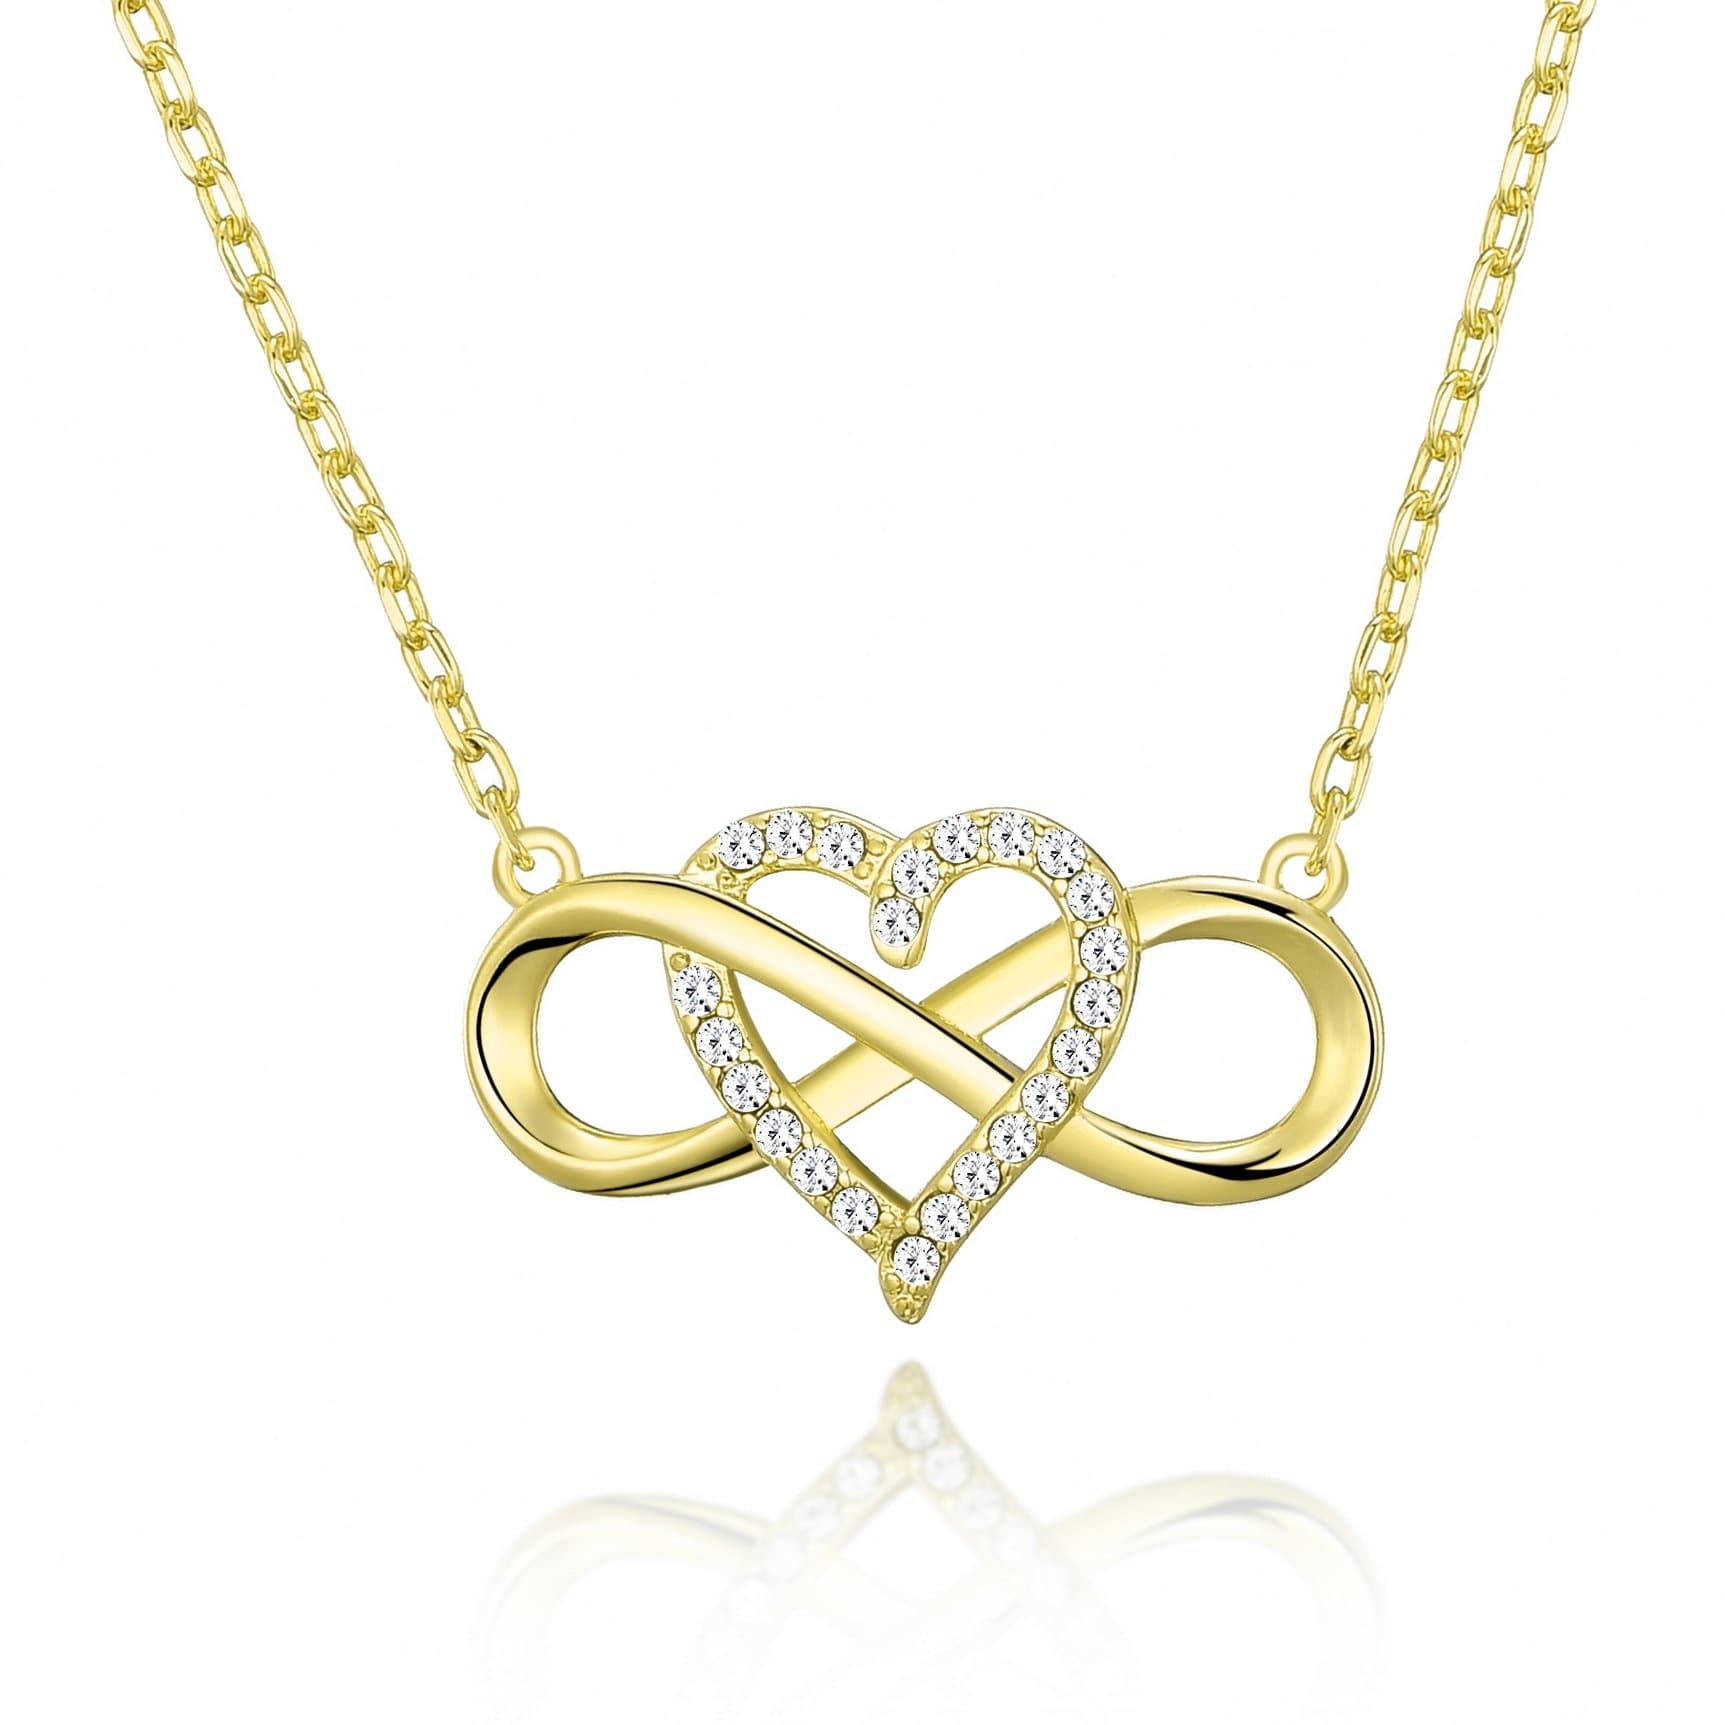 Gold Plated Infinity Heart Necklace Created with Zircondia® Crystals by Philip Jones Jewellery